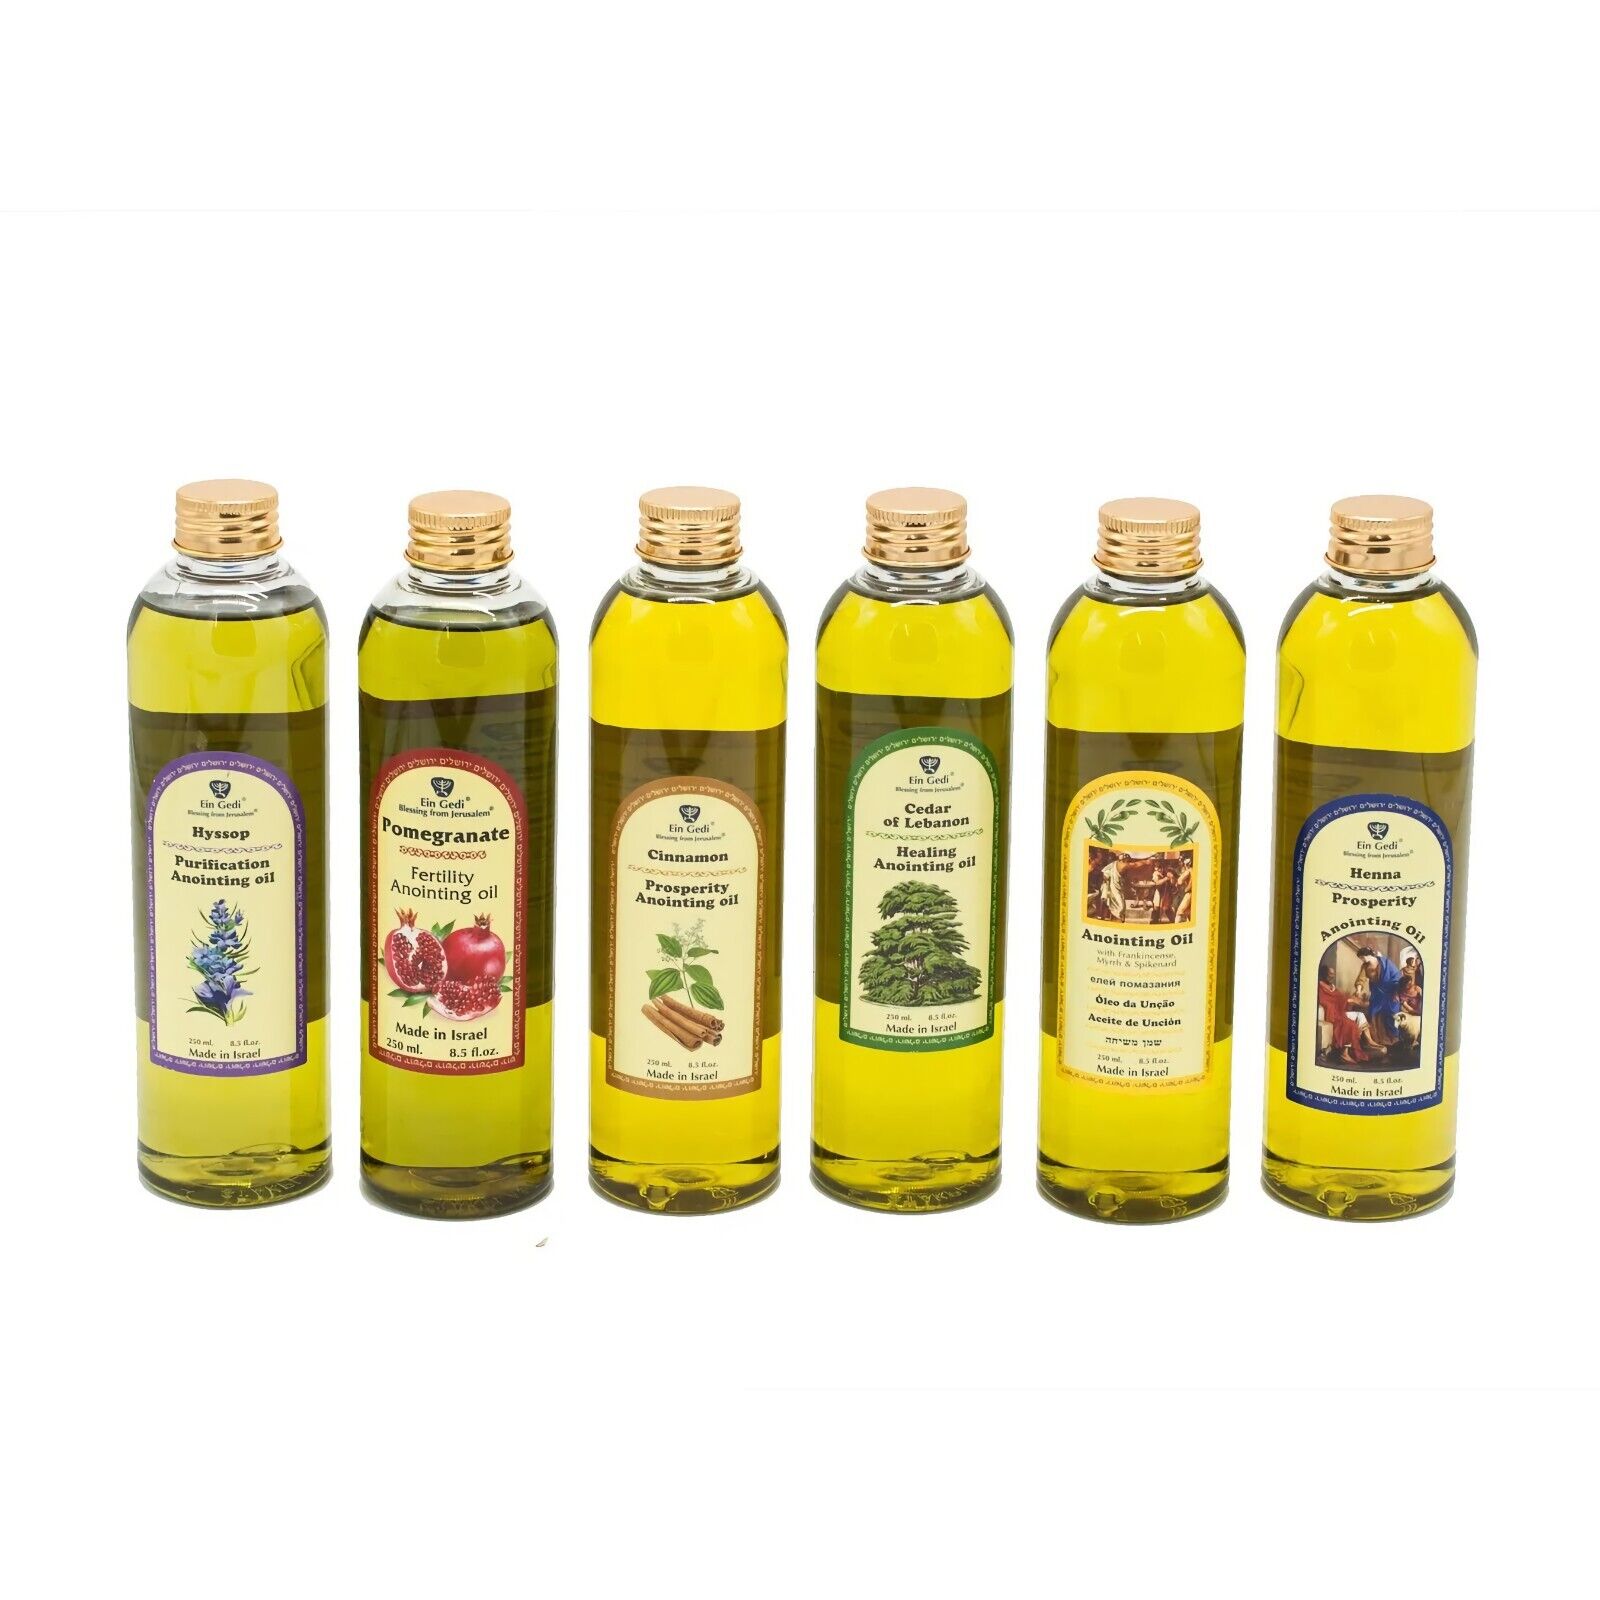 Lot of 6 x mixed Anointing Oils 250 ml.- 8.5 fl.oz from Holyland Jerusalem